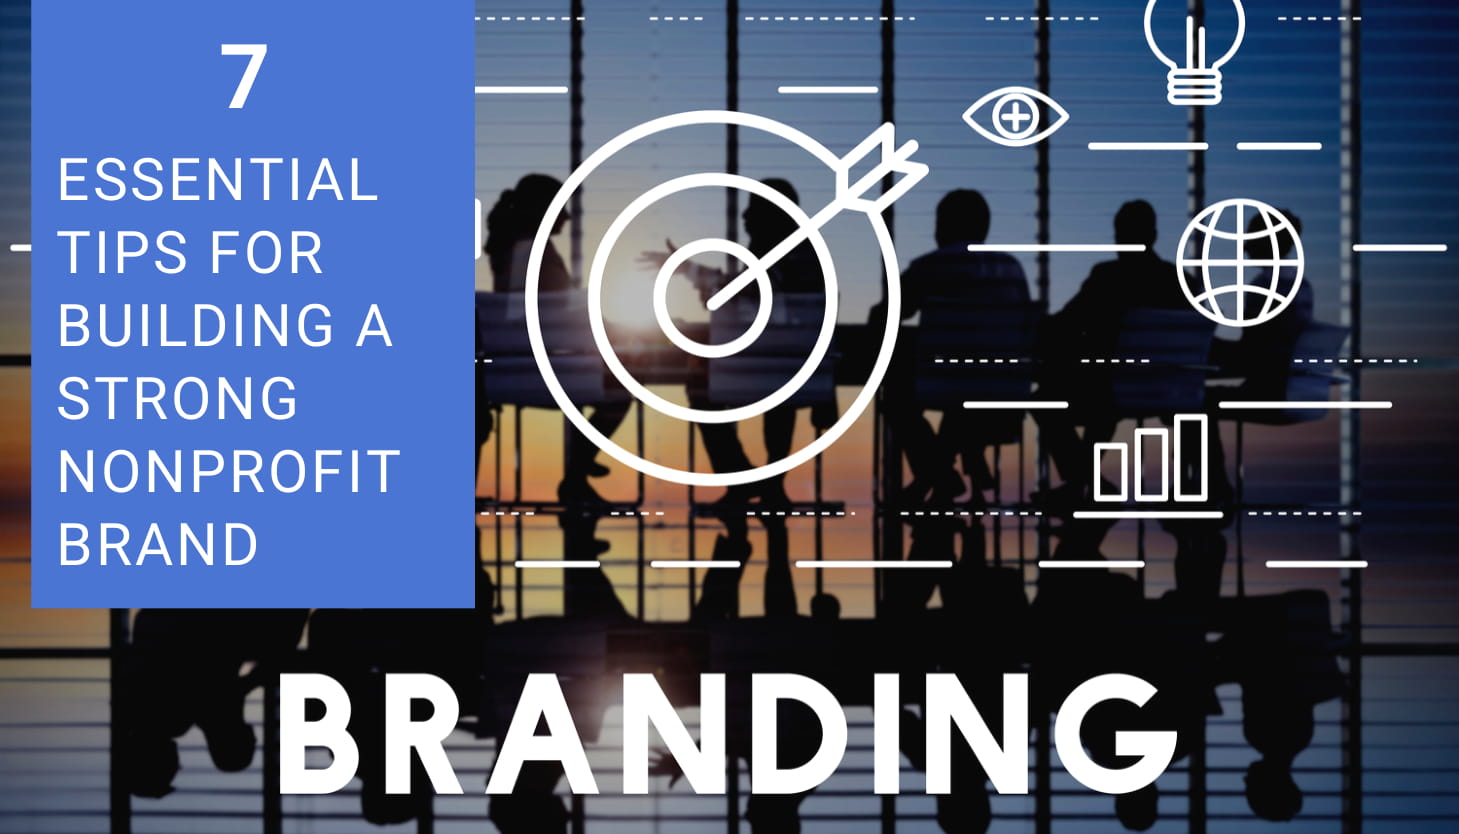 7 Essential Tips for Building a Strong Nonprofit Brand | Donorbox